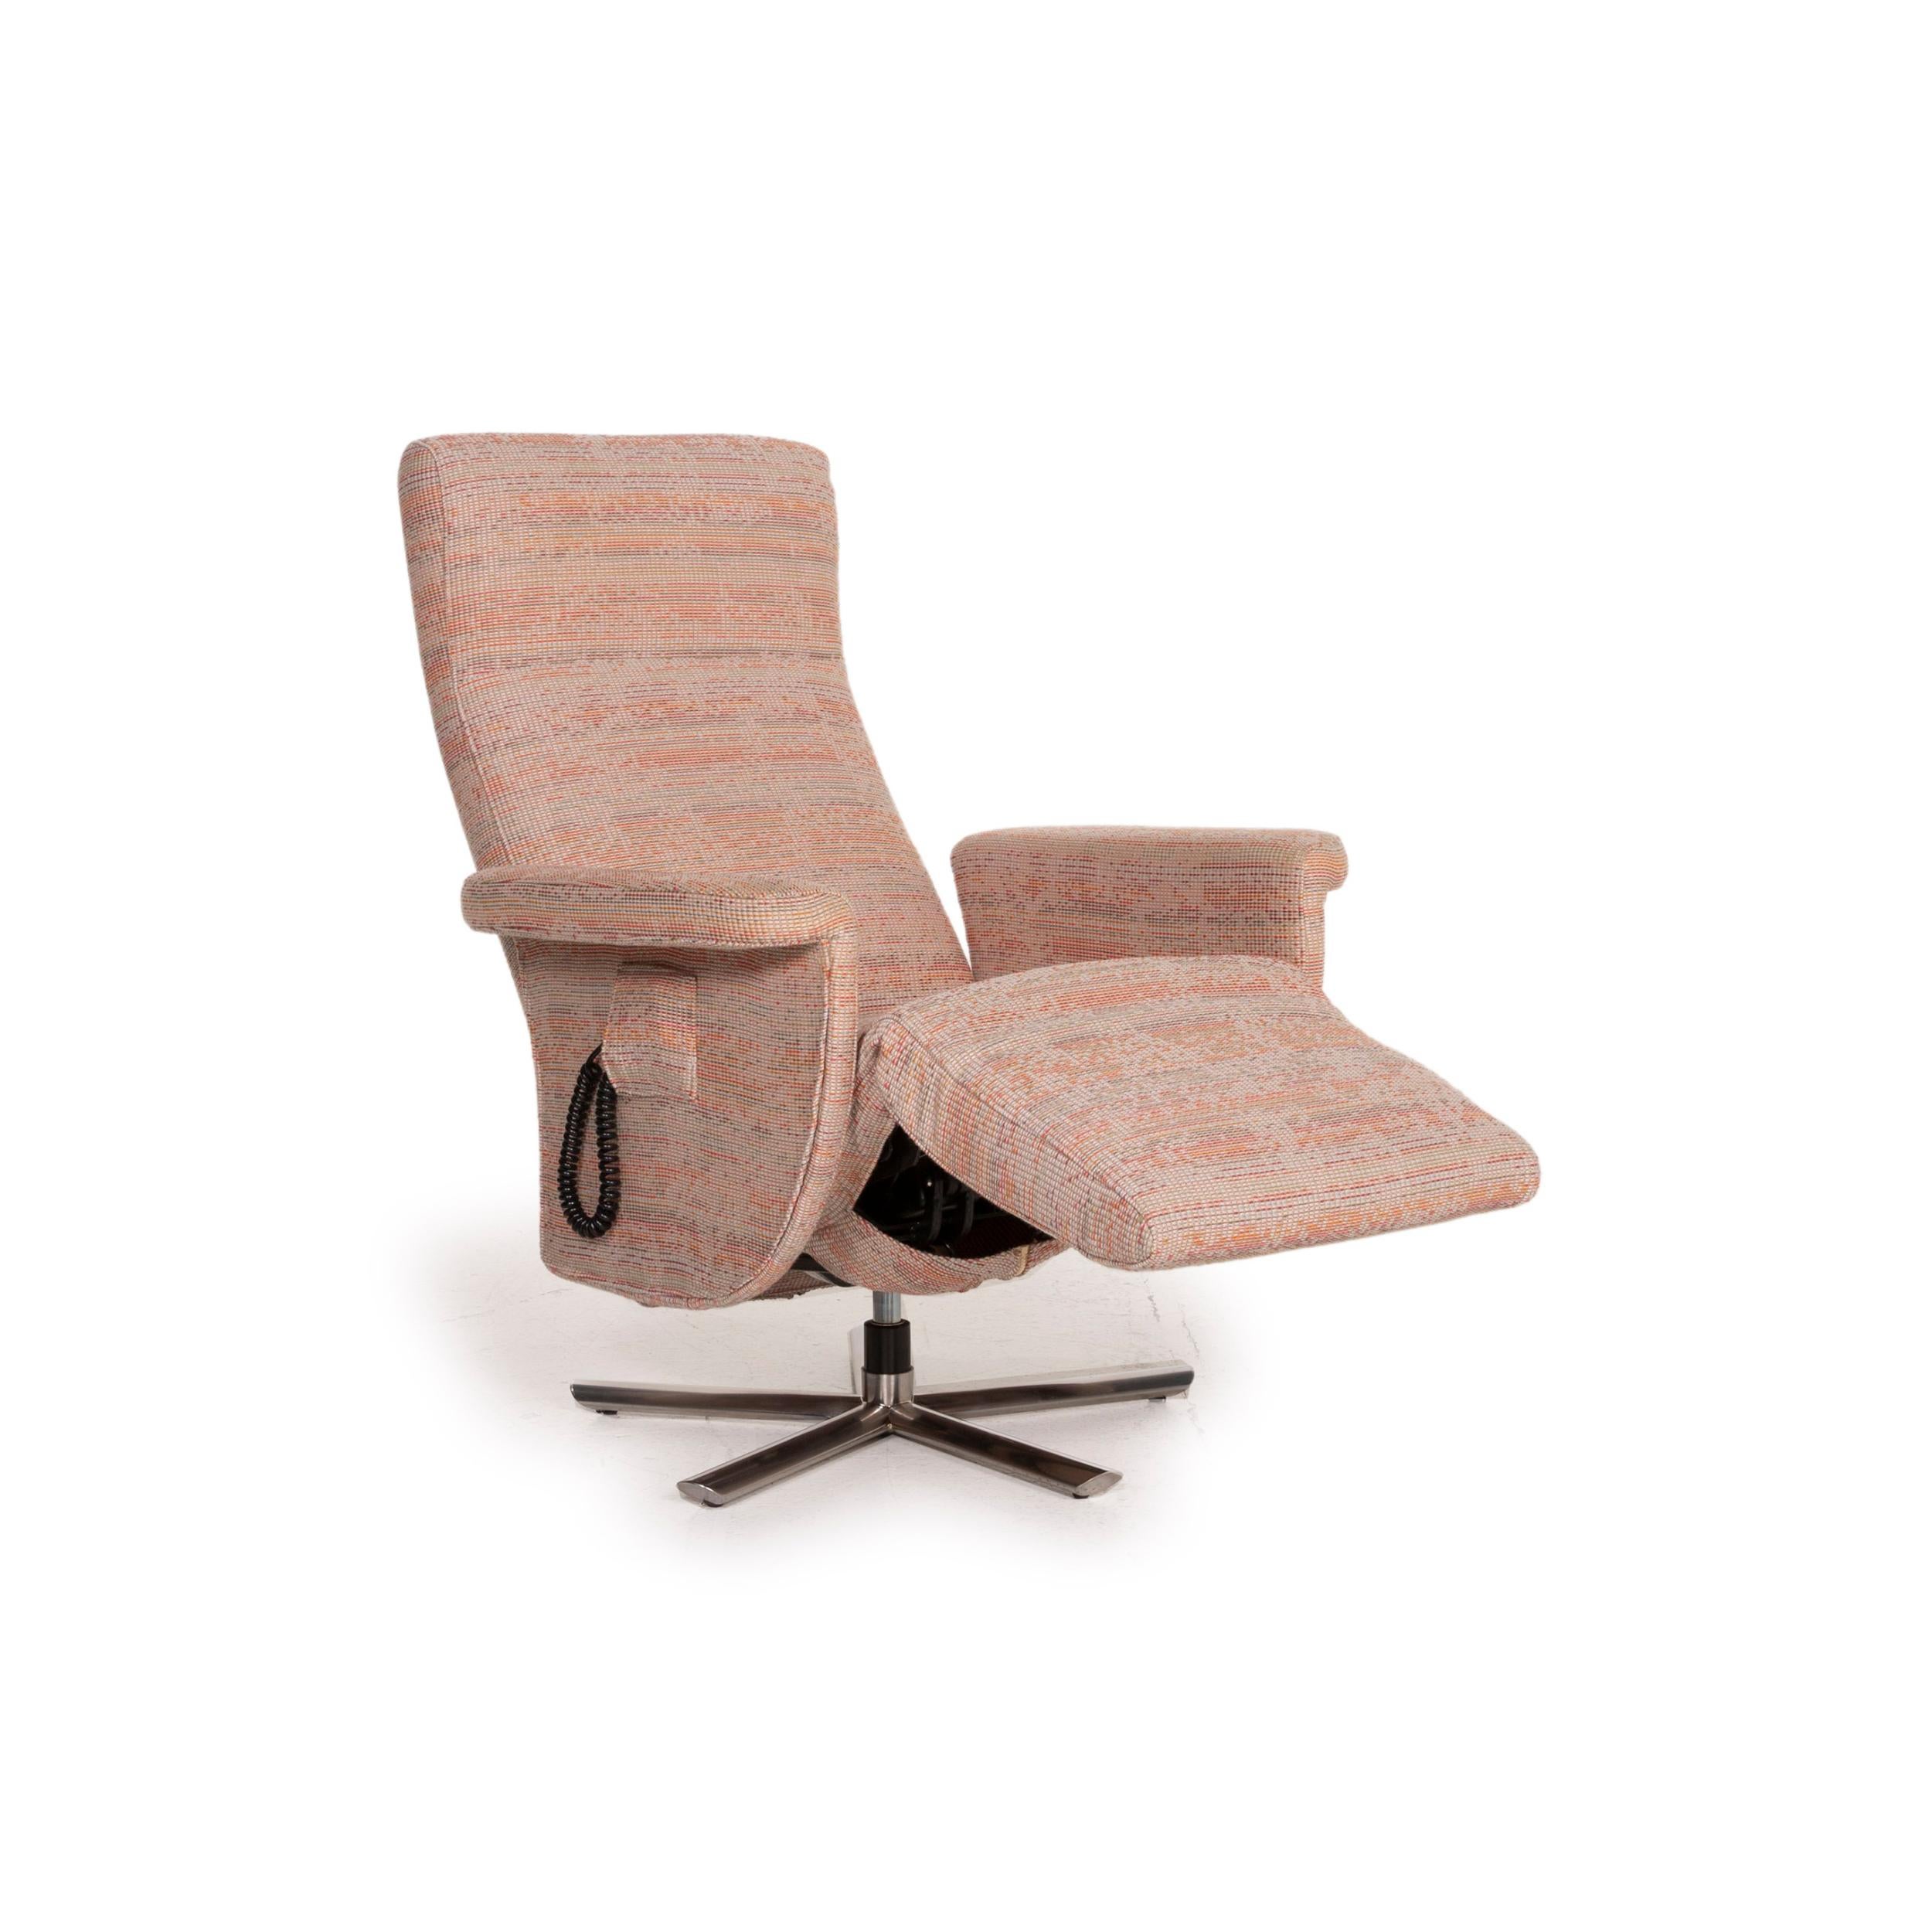 Contemporary Strässle Fabric Armchair Rosé Beige Pastel Electrical Function Relaxation For Sale